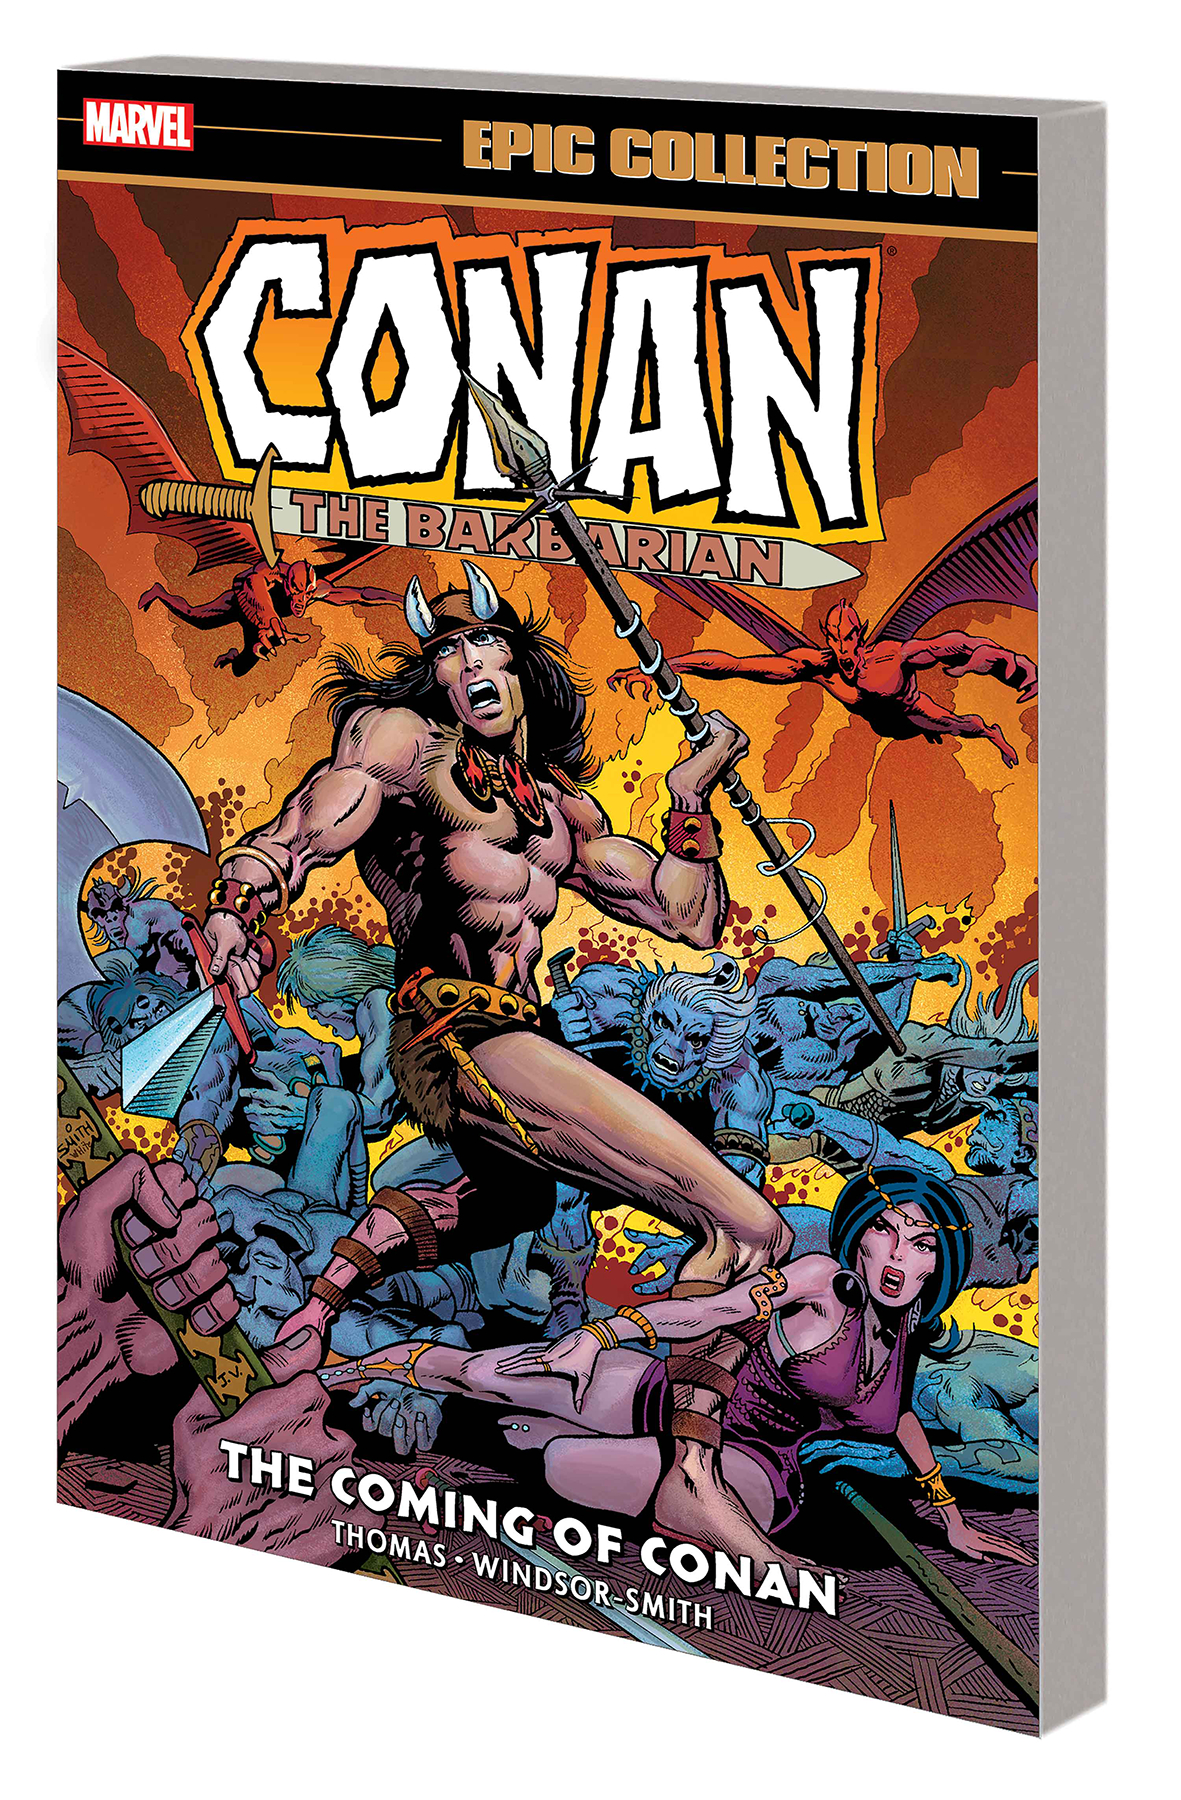 Conan the Barbarian the Original Marvel Years Epic Collection Graphic Novel Volume 1 Coming of Conan